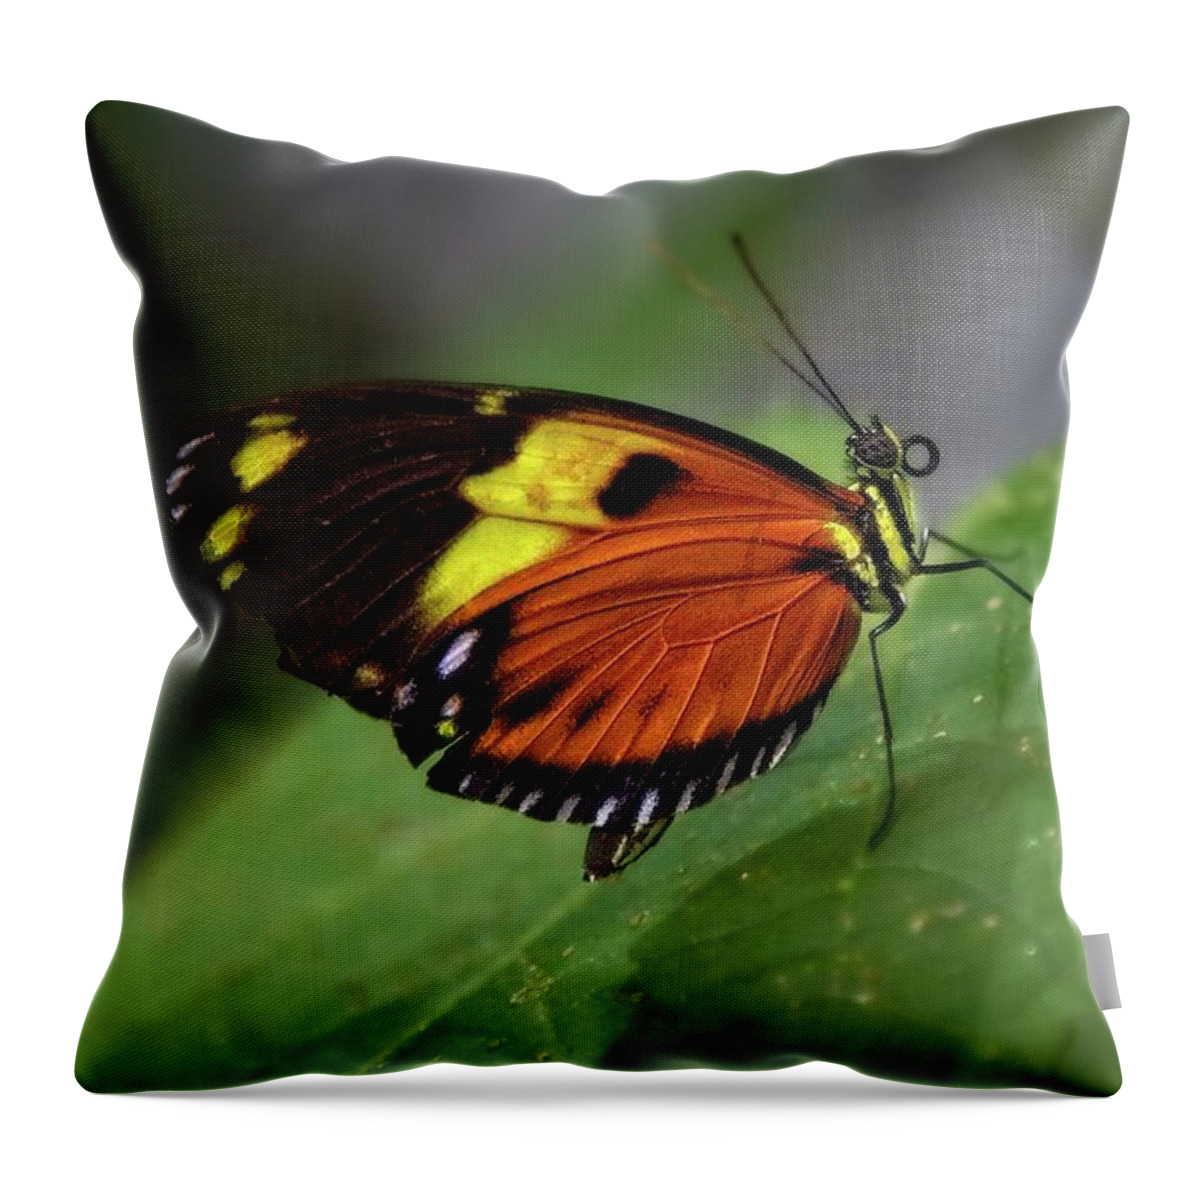 Wildlife Throw Pillow featuring the photograph Butterfly #1 by Matthew Adelman